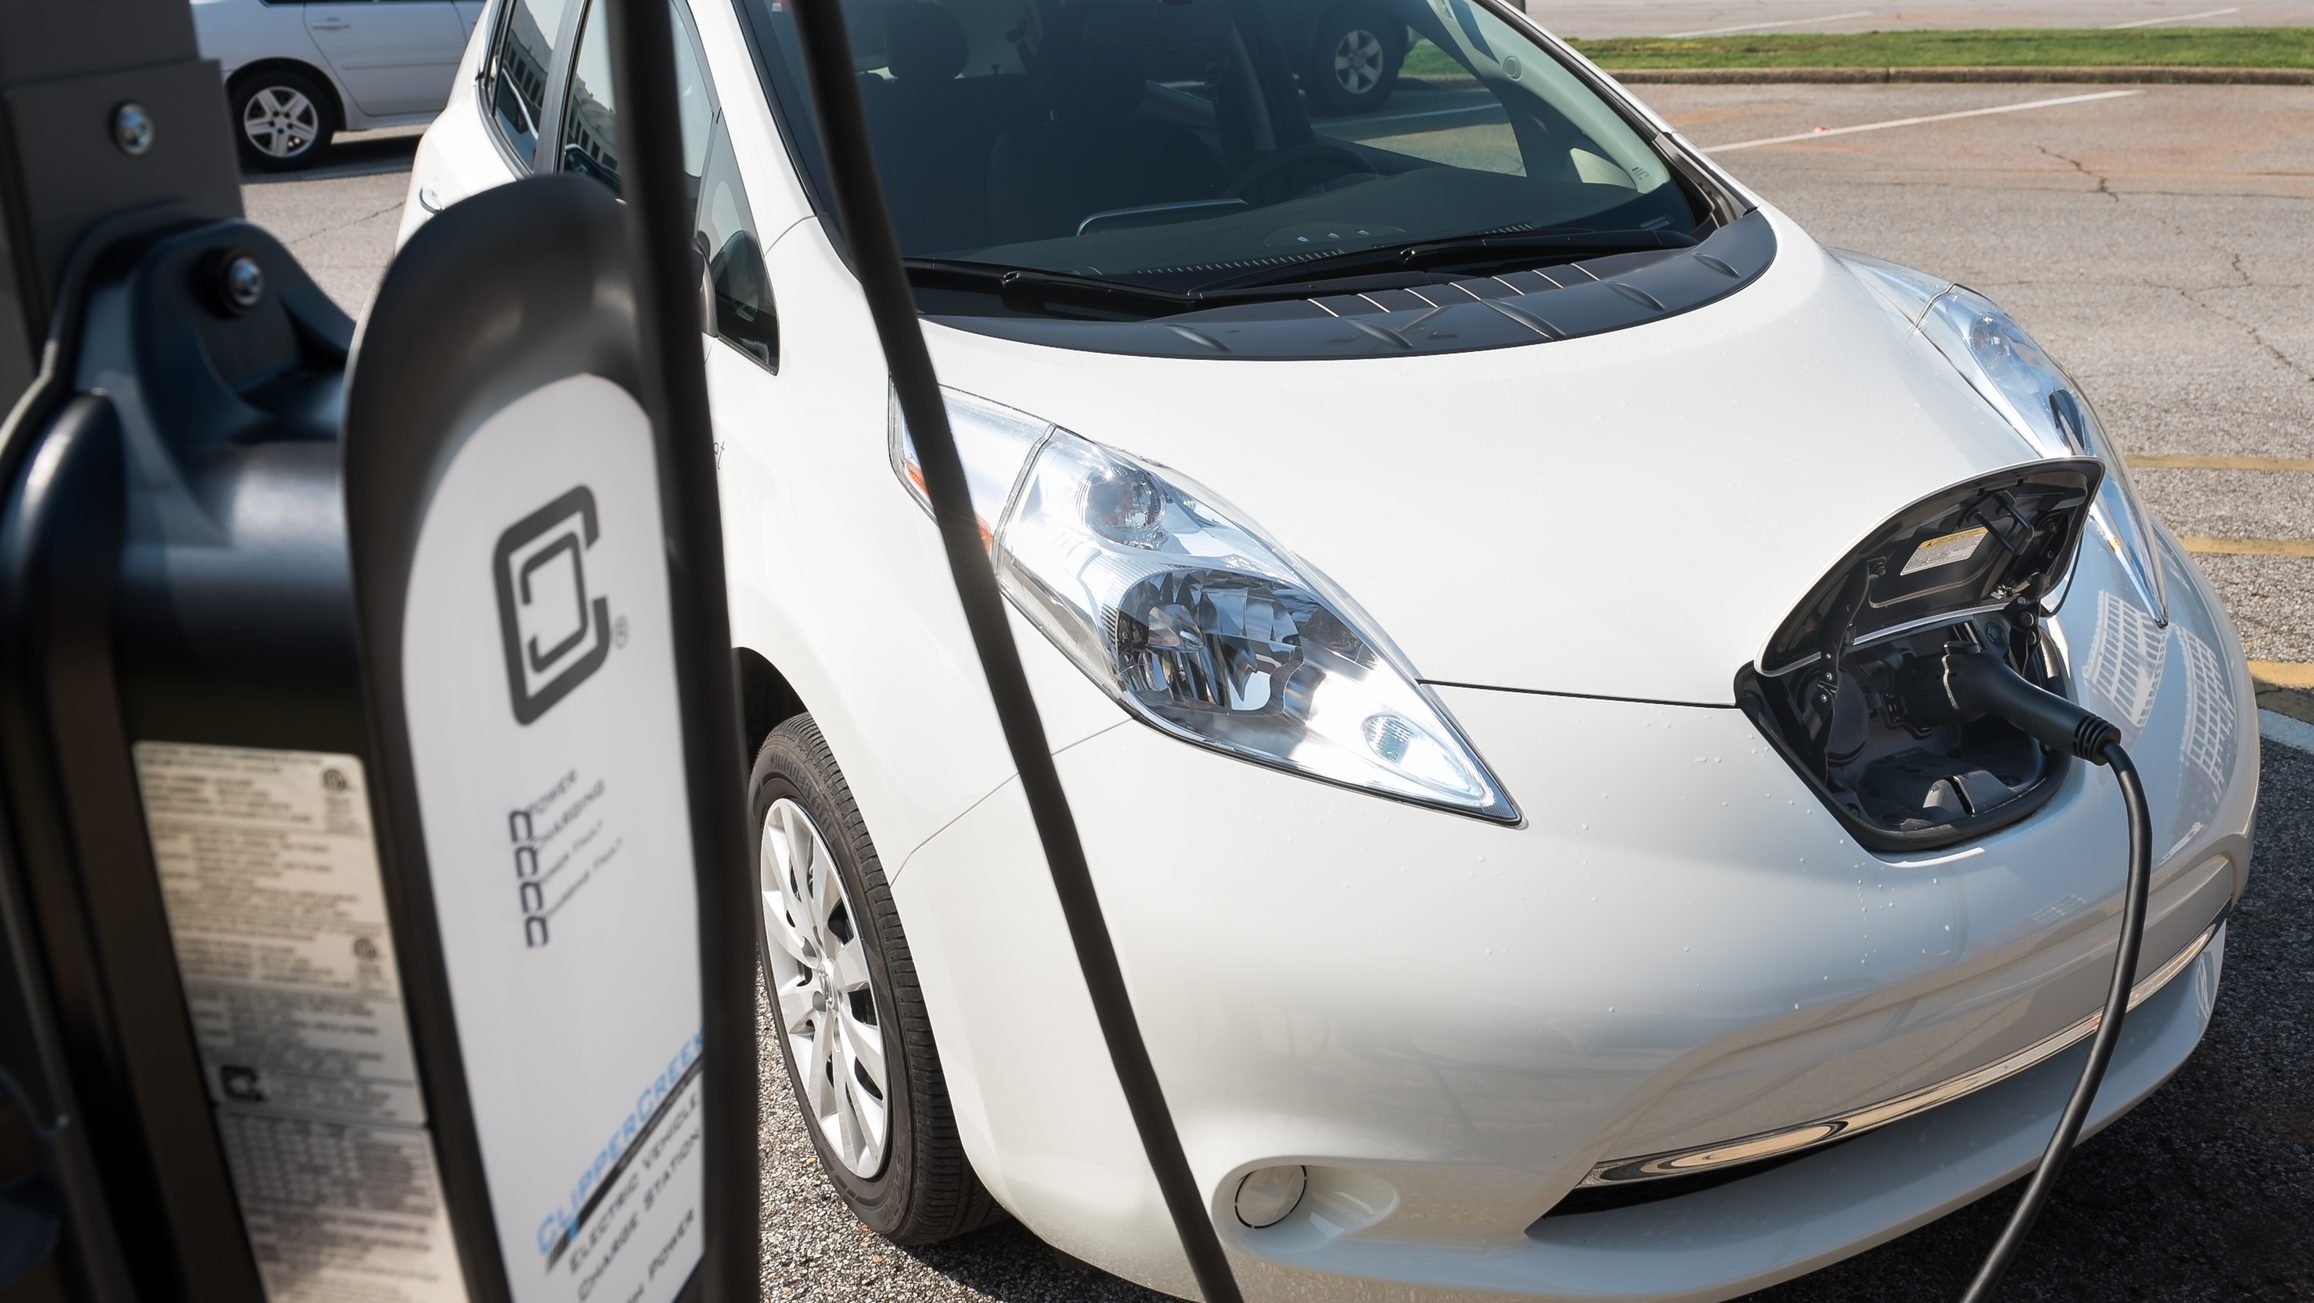 Leaf electric vehicle at various charging stations around campus